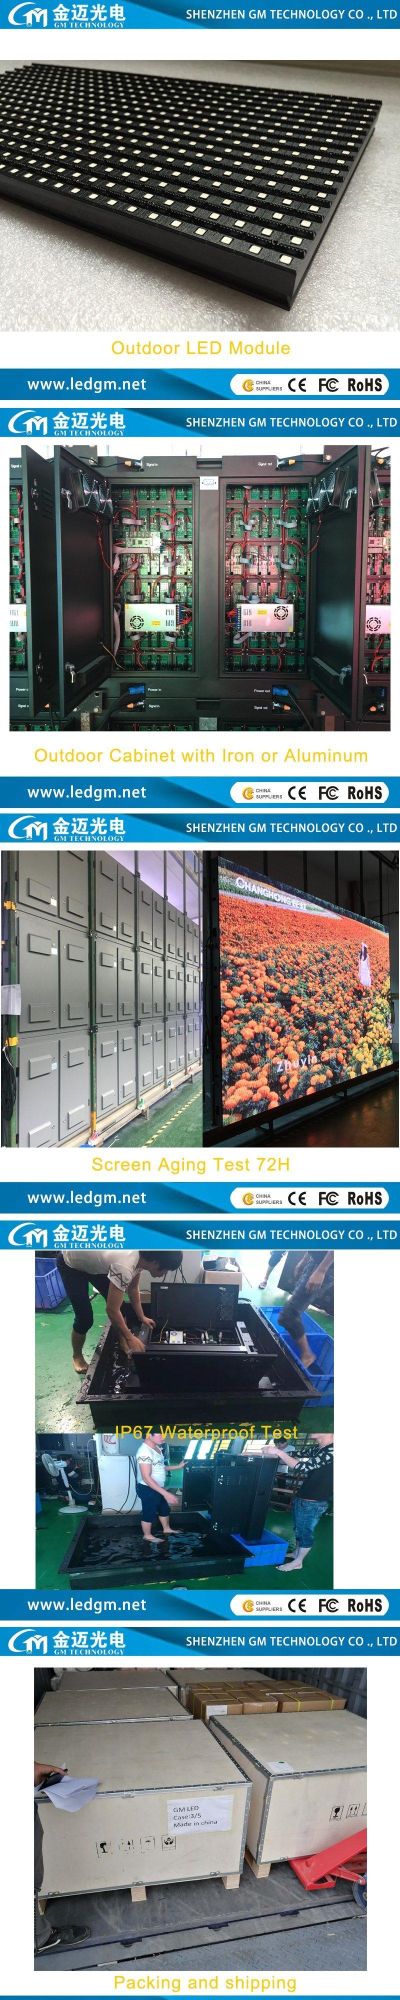 Outdoor High Brightness Full Color P10 LED Display for Video Advertising LED Screen